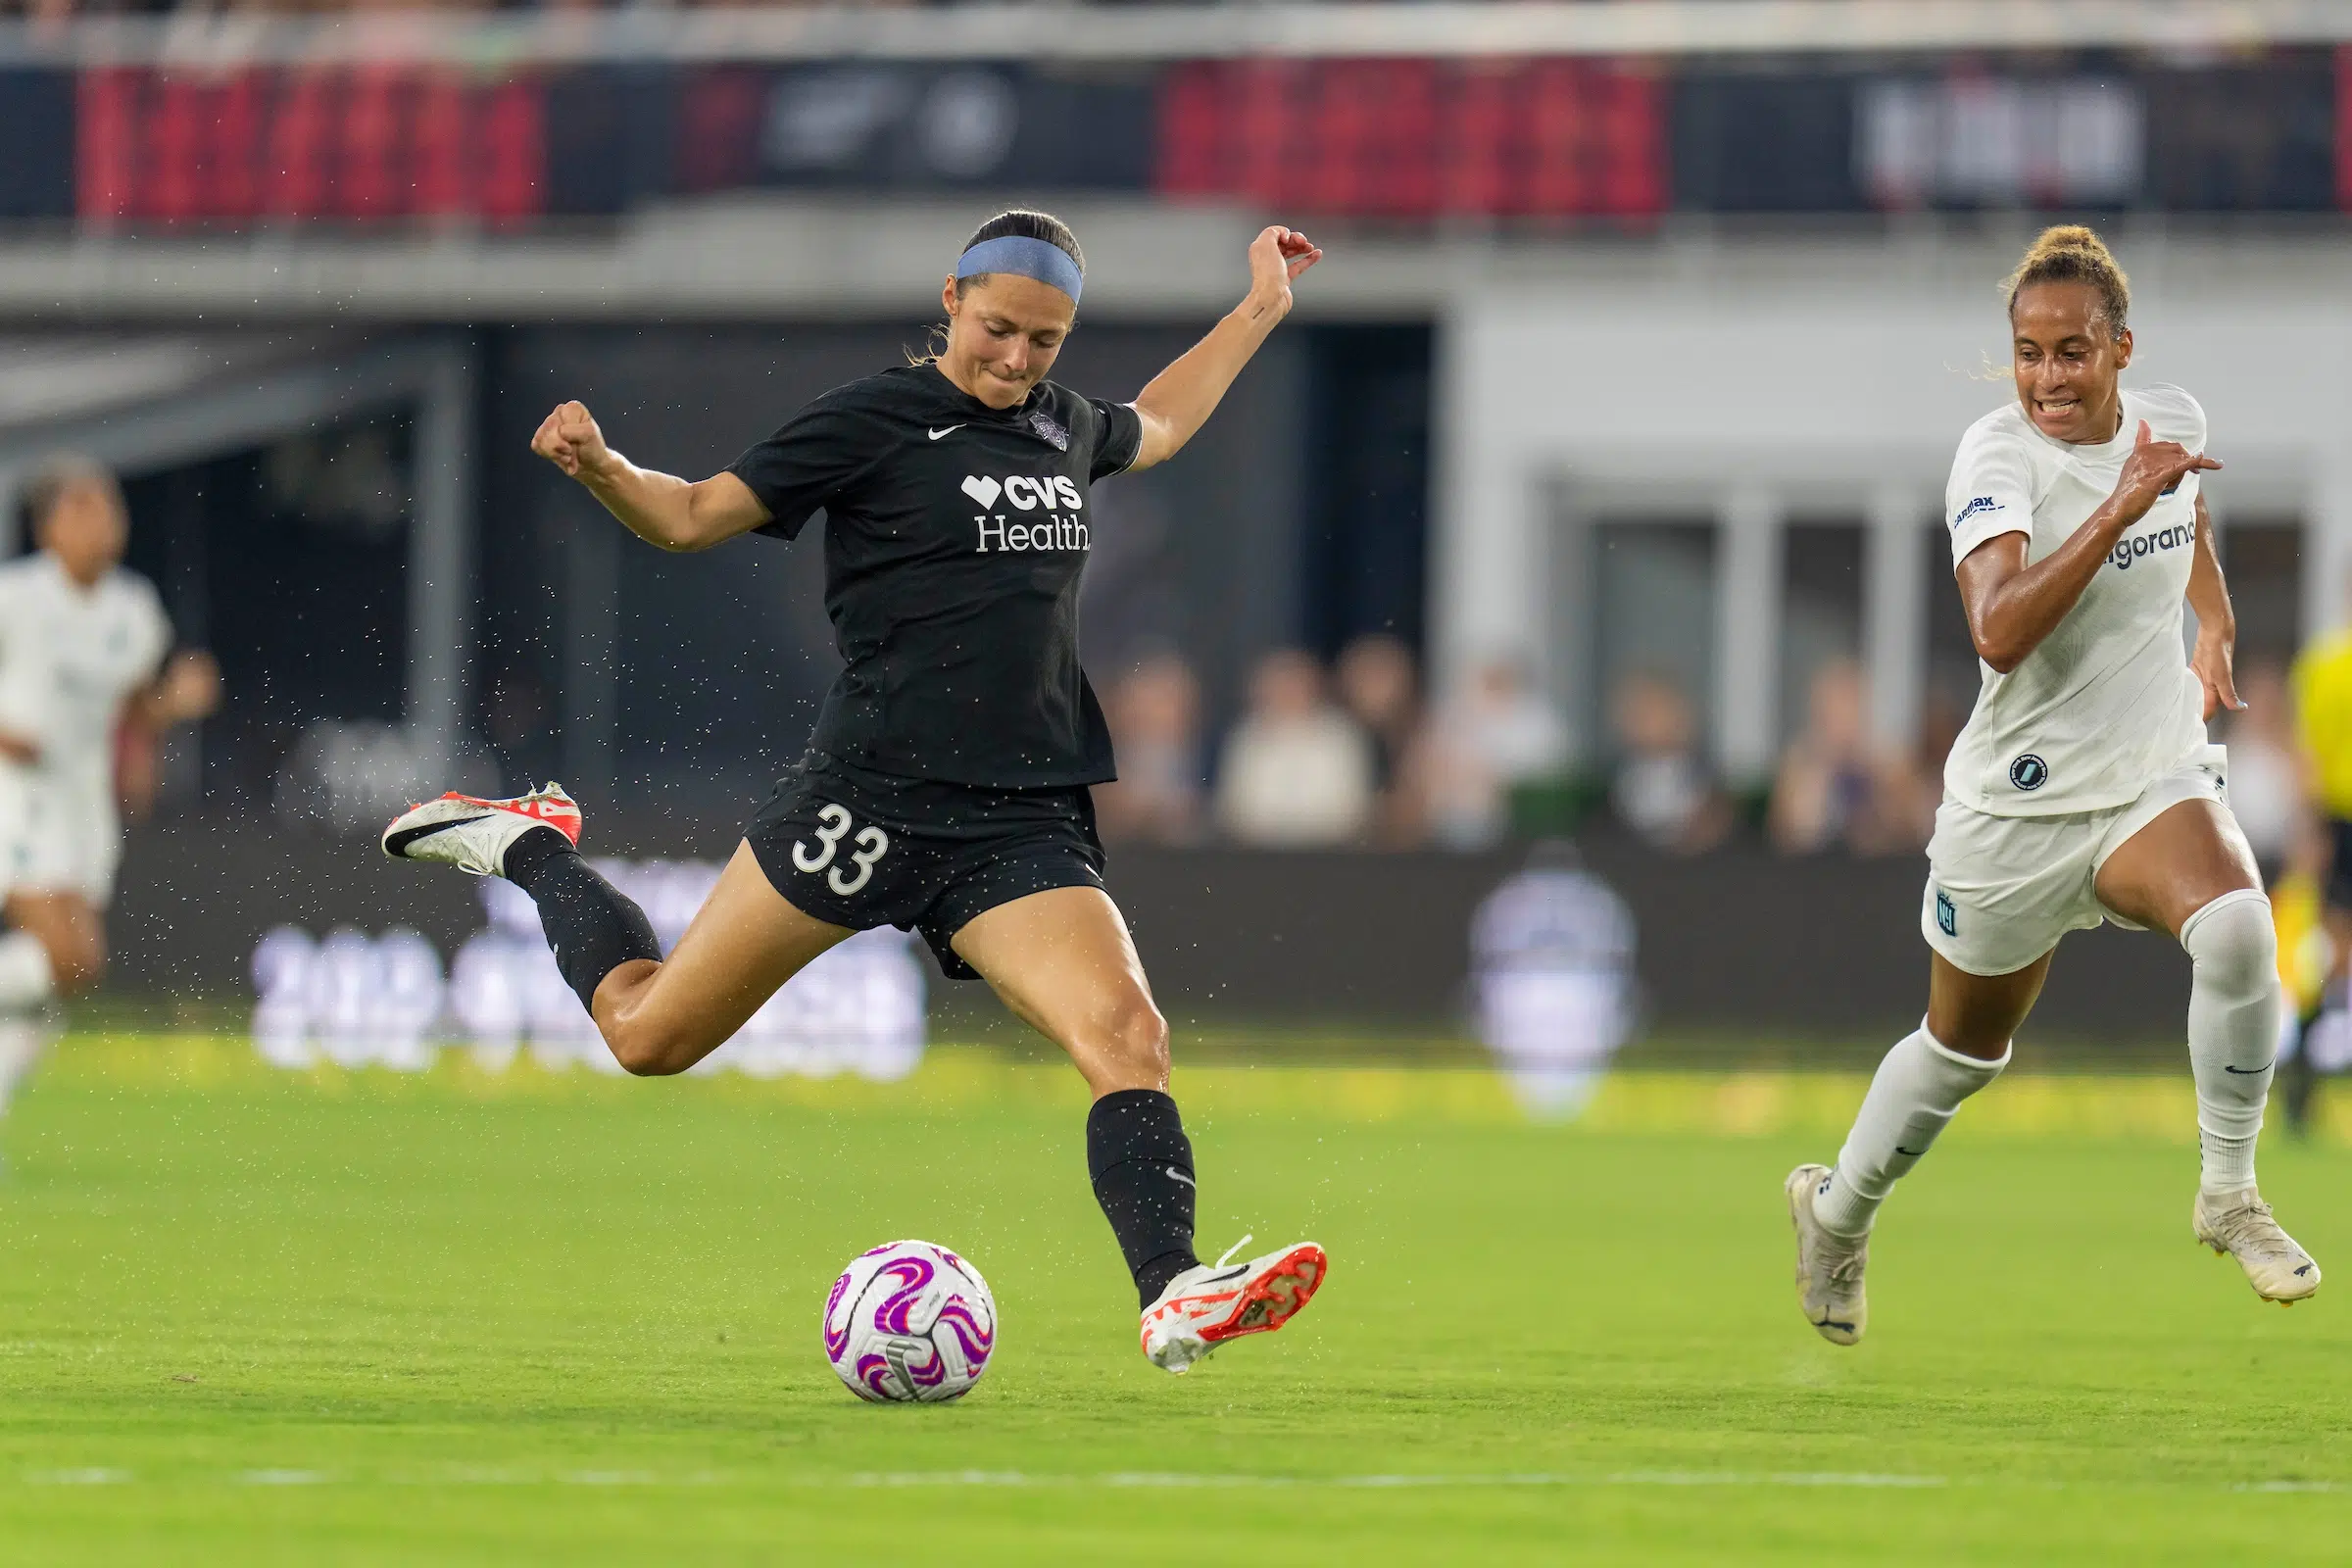 Ashley Hatch in a black uniform and white and red cleats, winds up to kick a soccer ball as a defender in an all white uniforms tries to keep up.